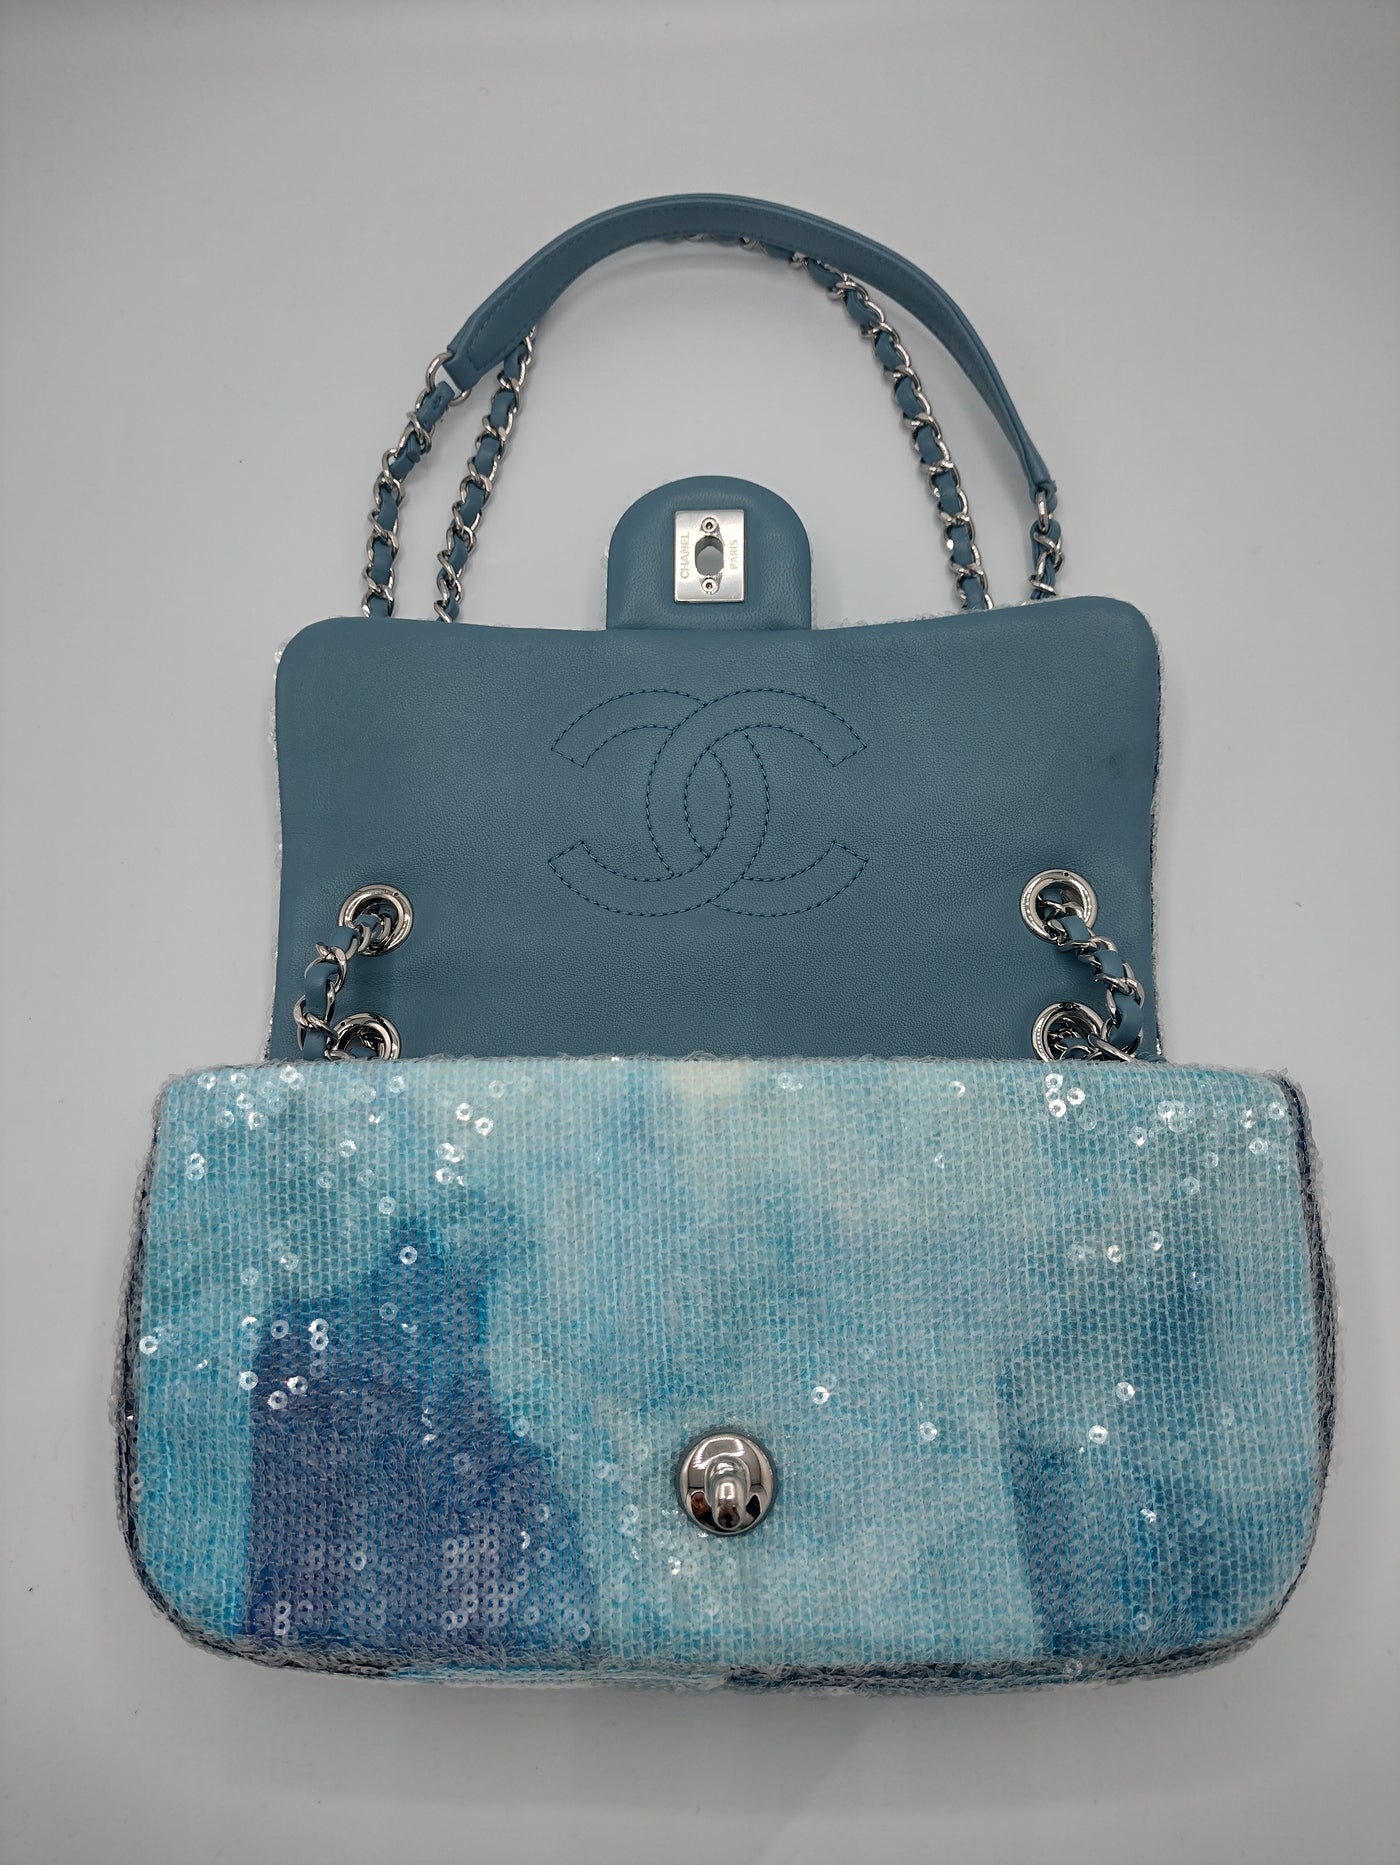 CHANEL waterfall blue sequin small flap bag